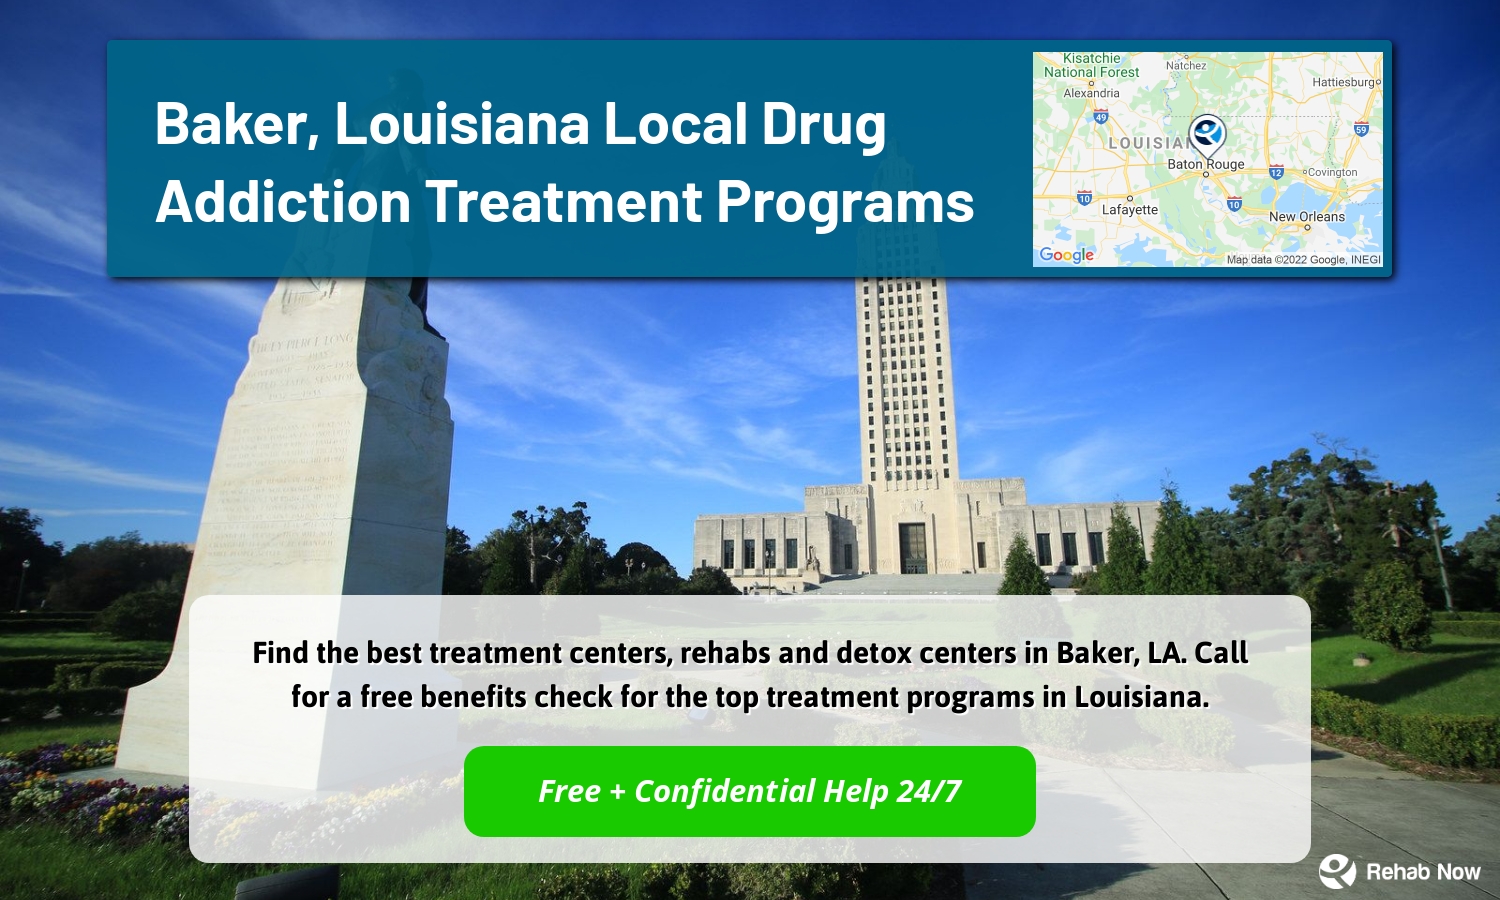 Find the best treatment centers, rehabs and detox centers in Baker, LA. Call for a free benefits check for the top treatment programs in Louisiana.